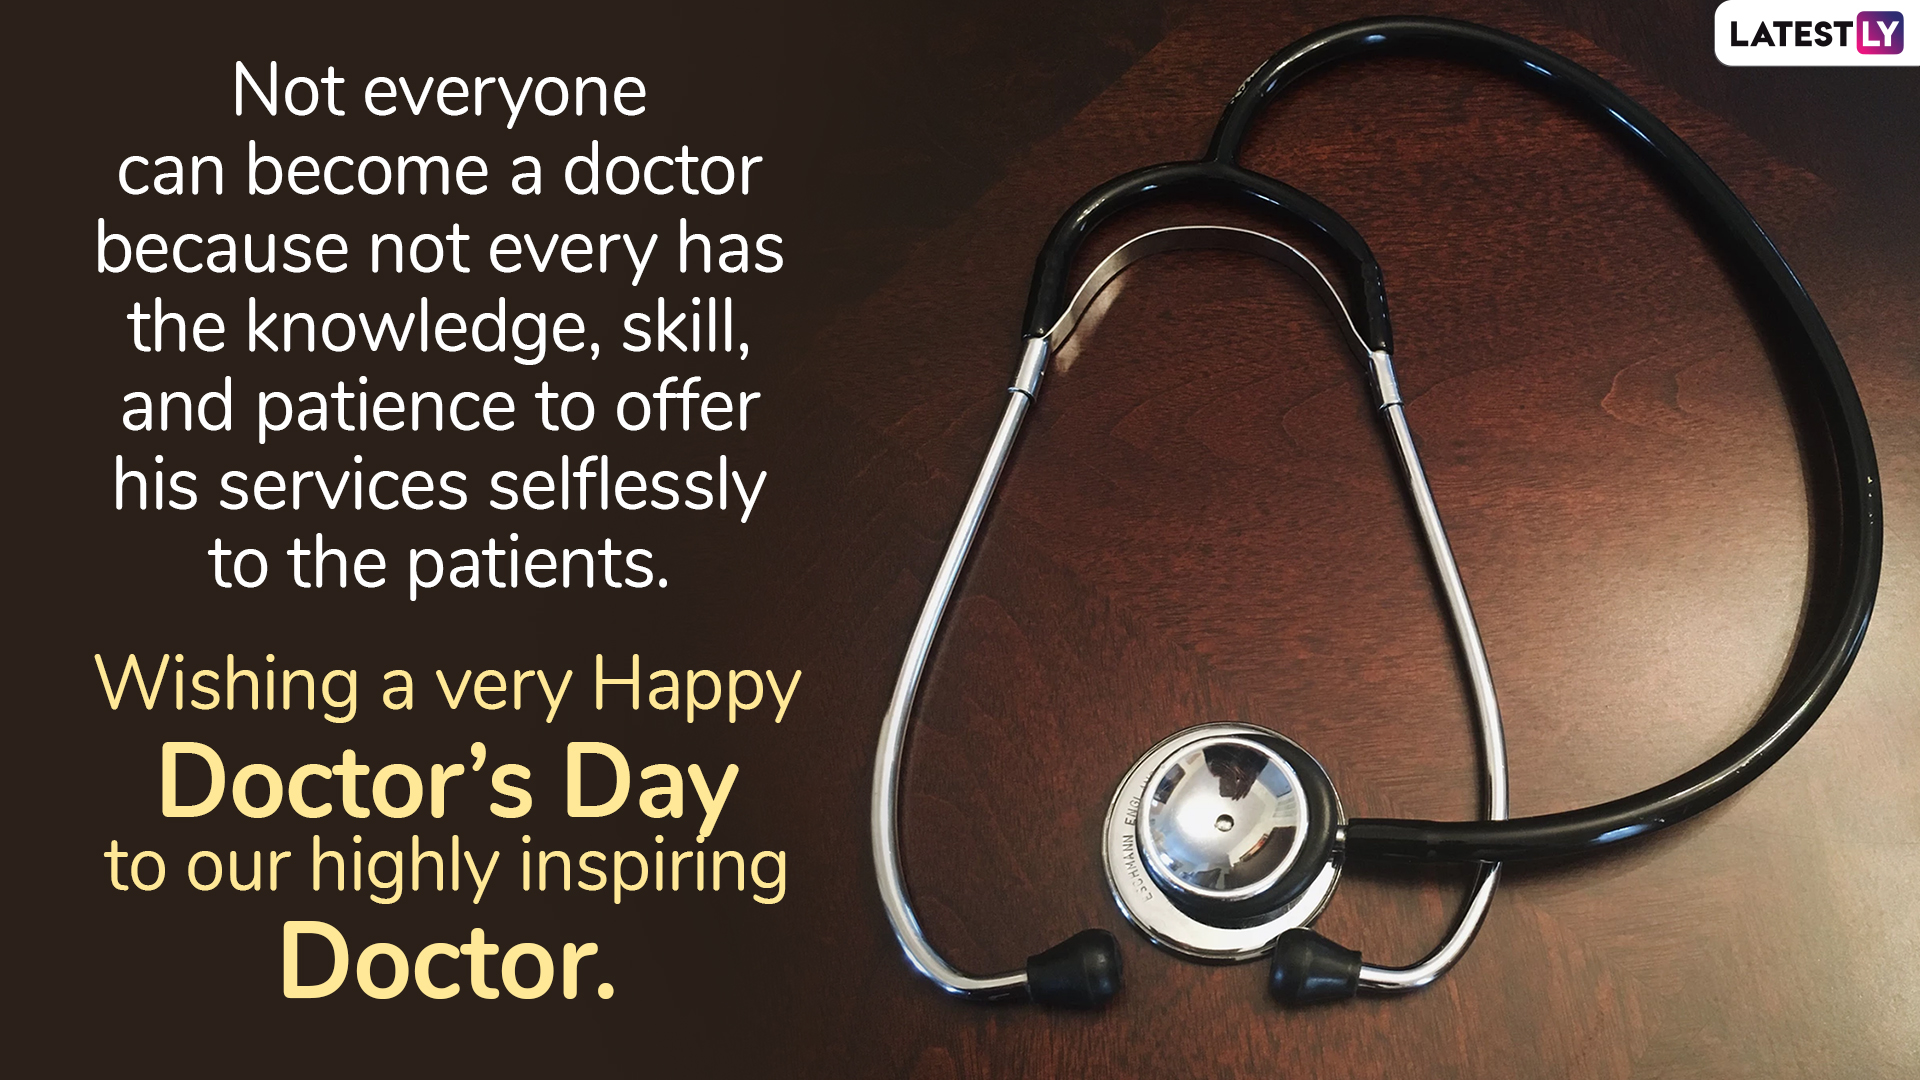 National Doctor’s Day 2019 Wishes WhatsApp Stickers, Quotes, GIF Image